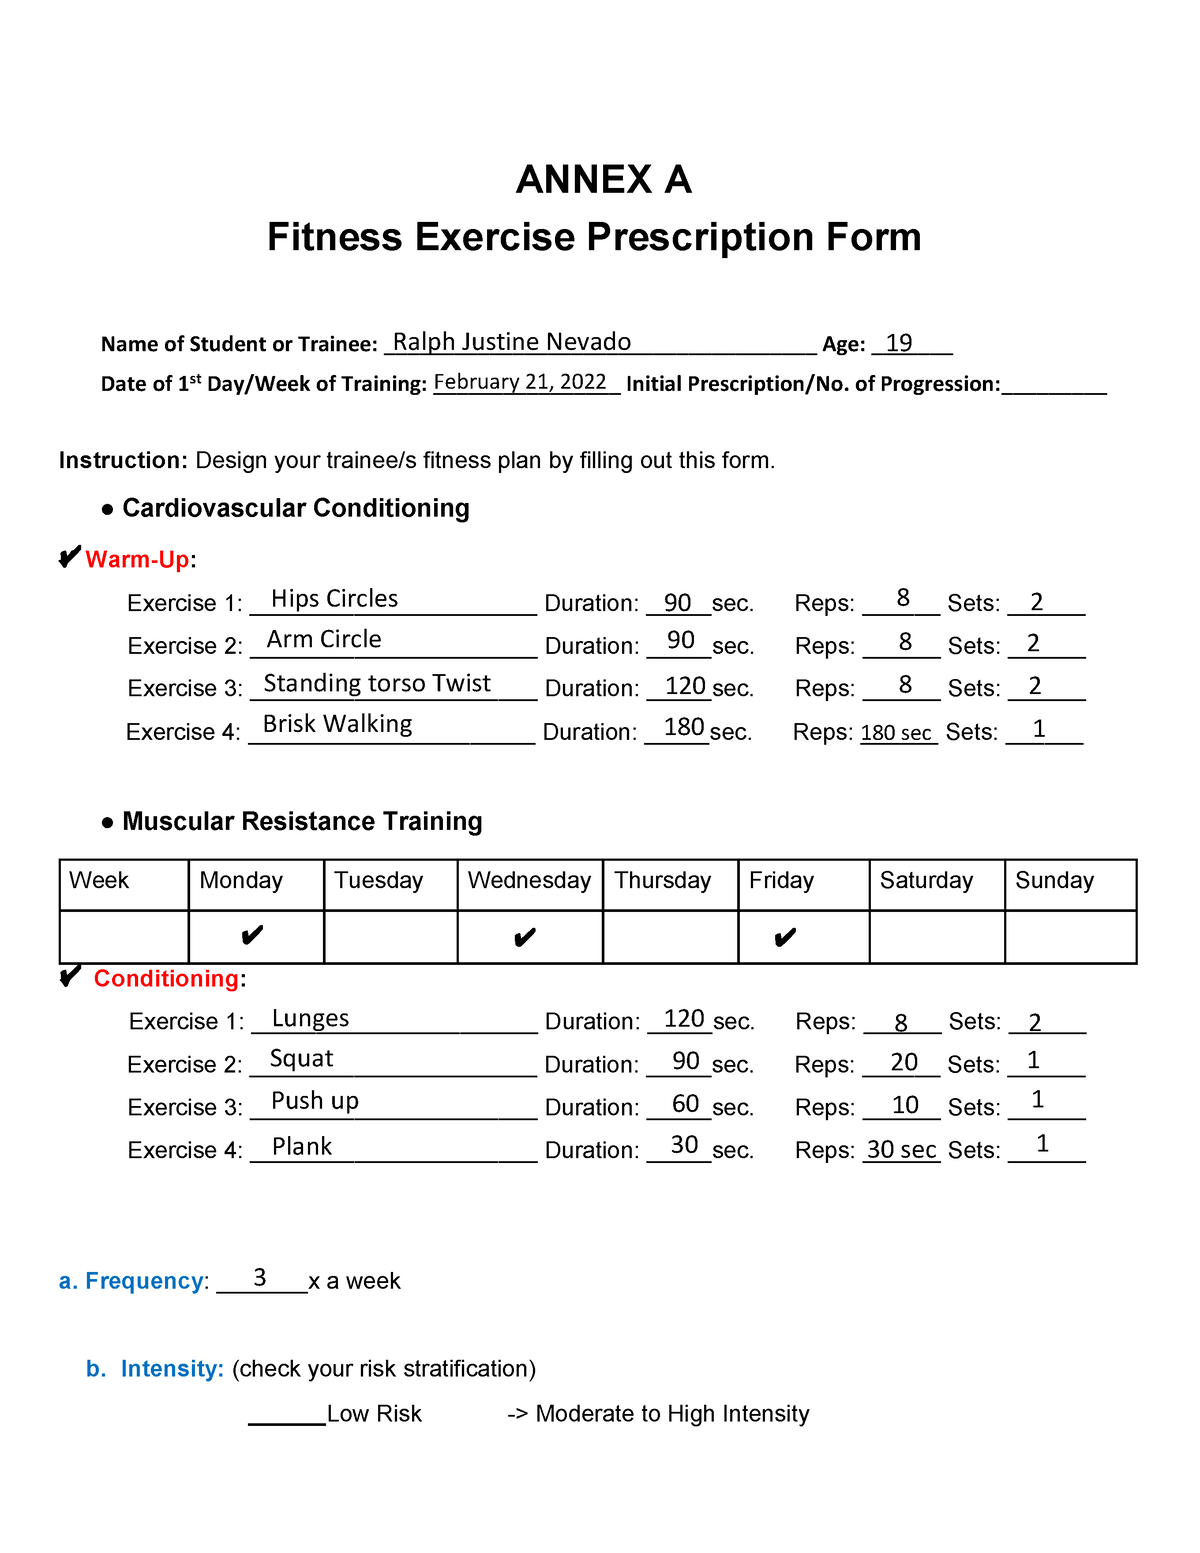 annex-a-ped-028-fitness-program-annex-a-fitness-exercise